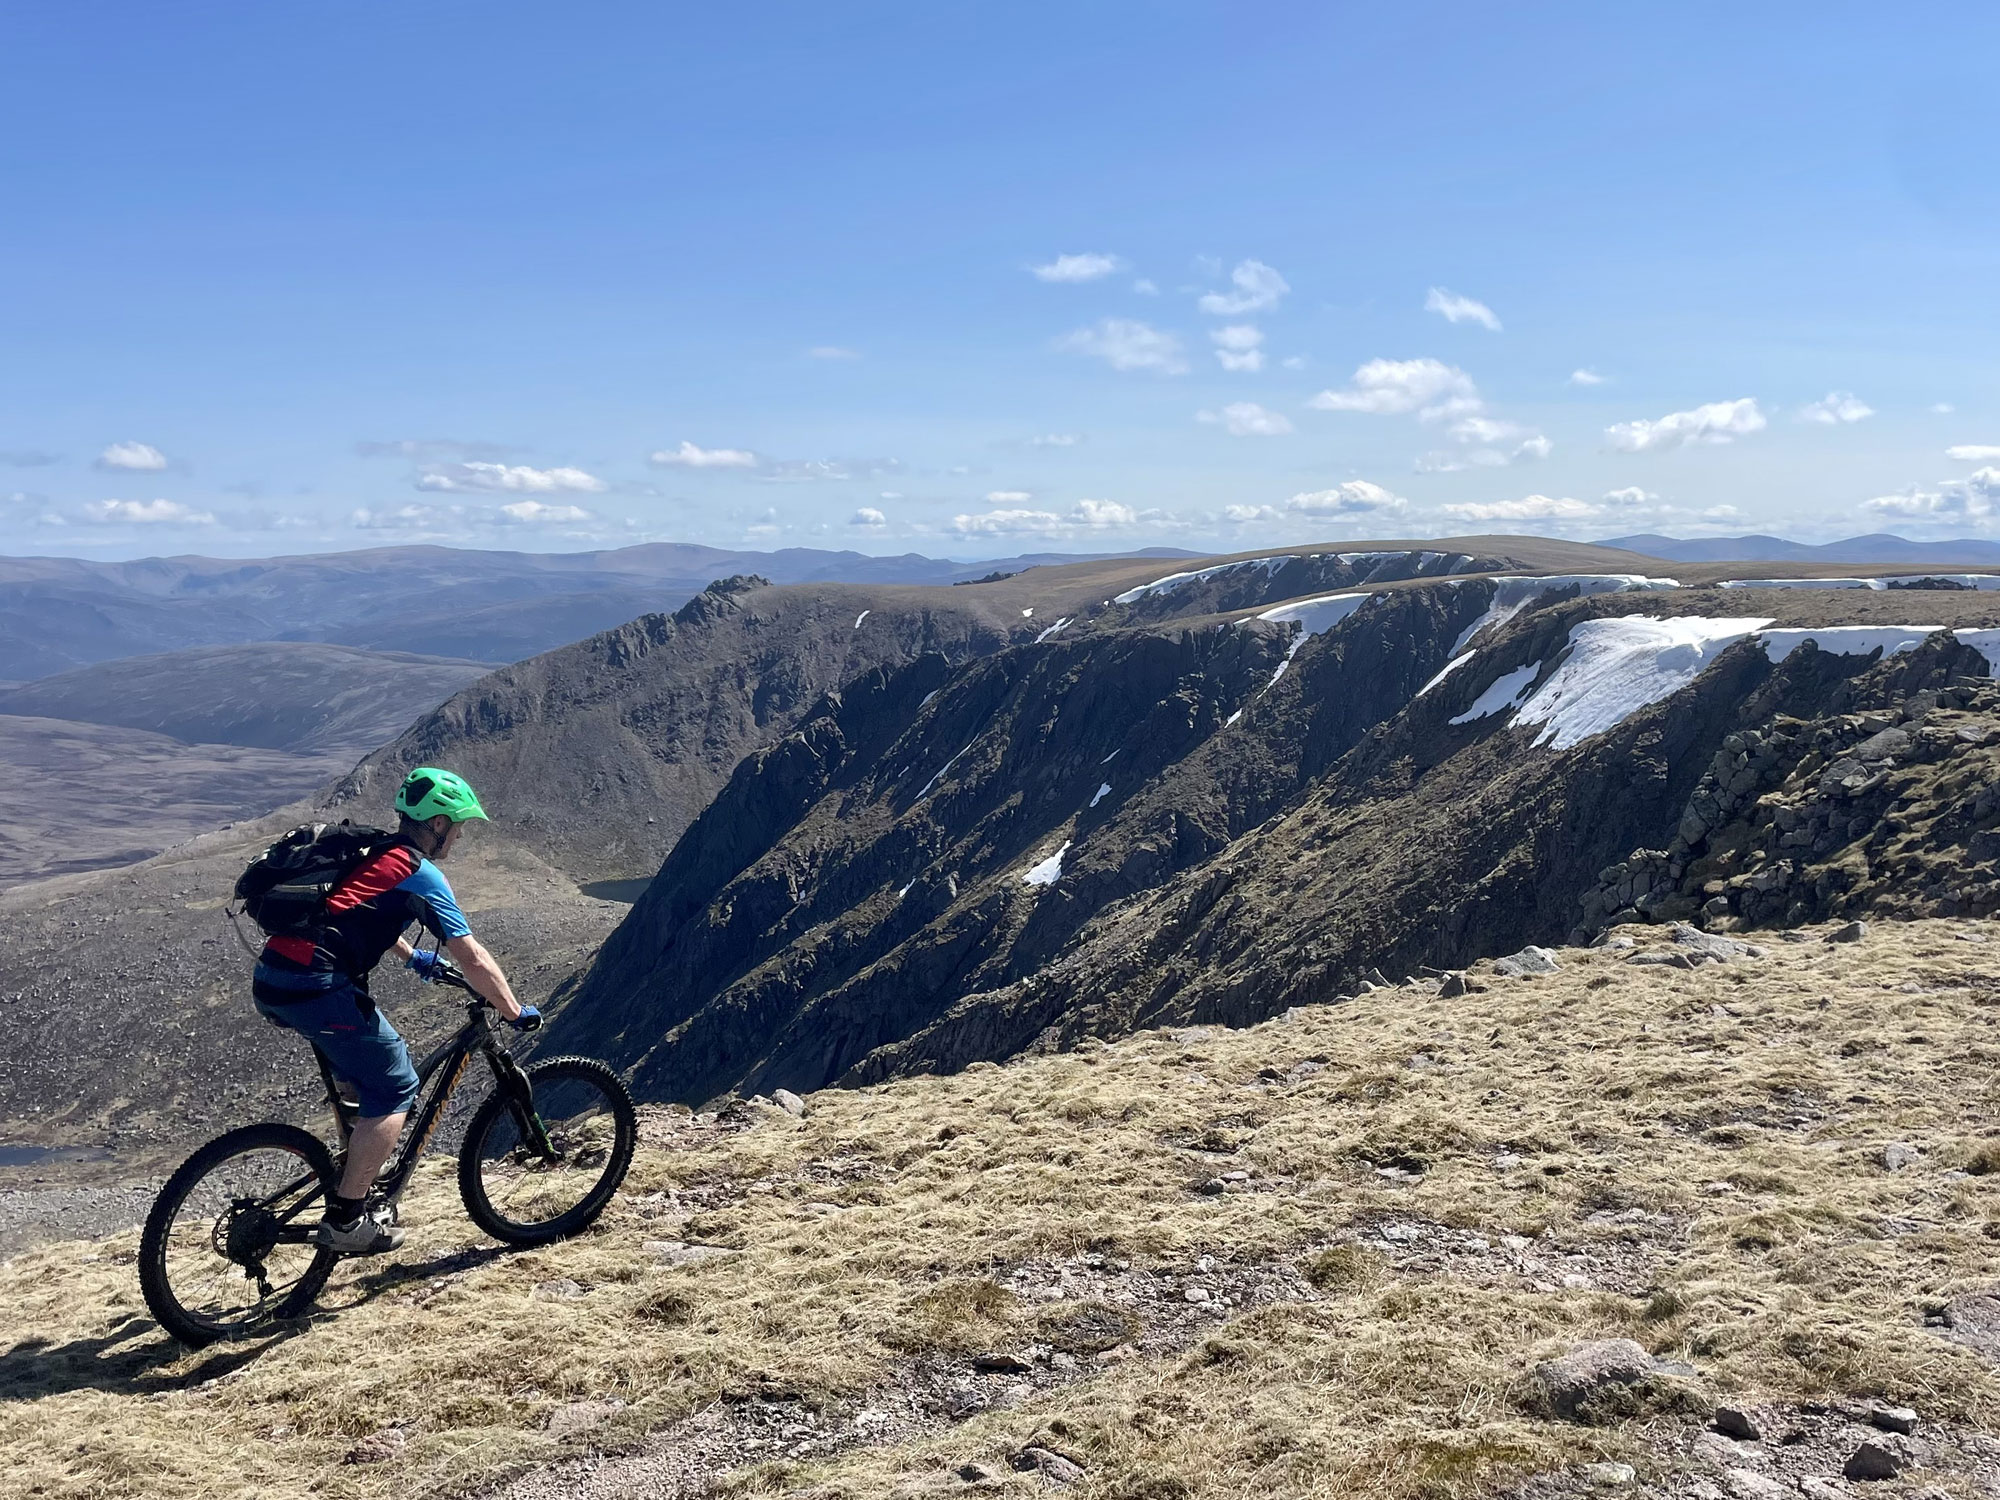 Mountain views of Ballater Deeside with MTB rider